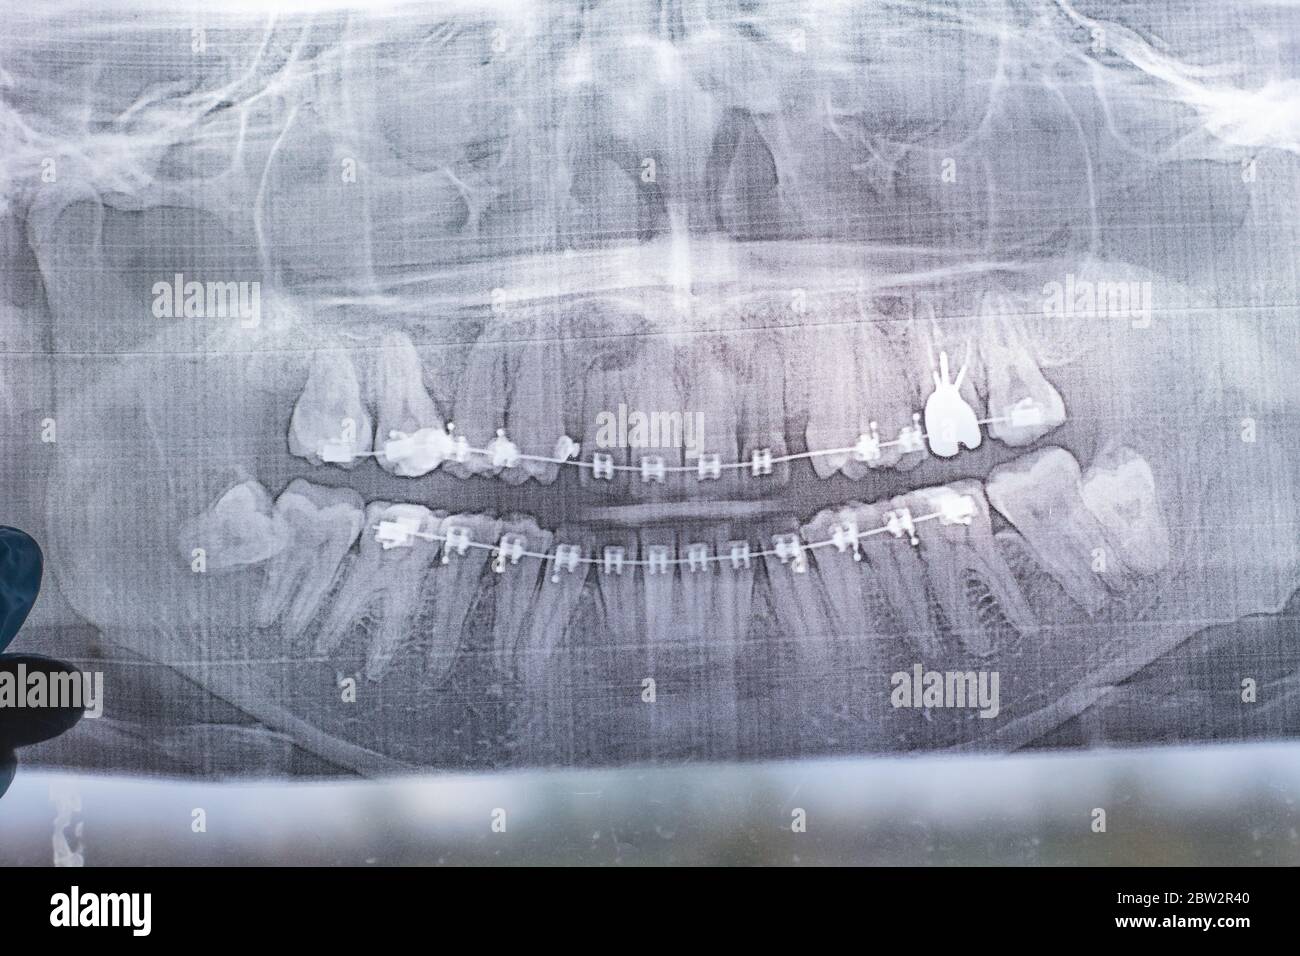 X-ray photograph of human teeth with a braces system. Retarded Wisdom Tooth Stock Photo